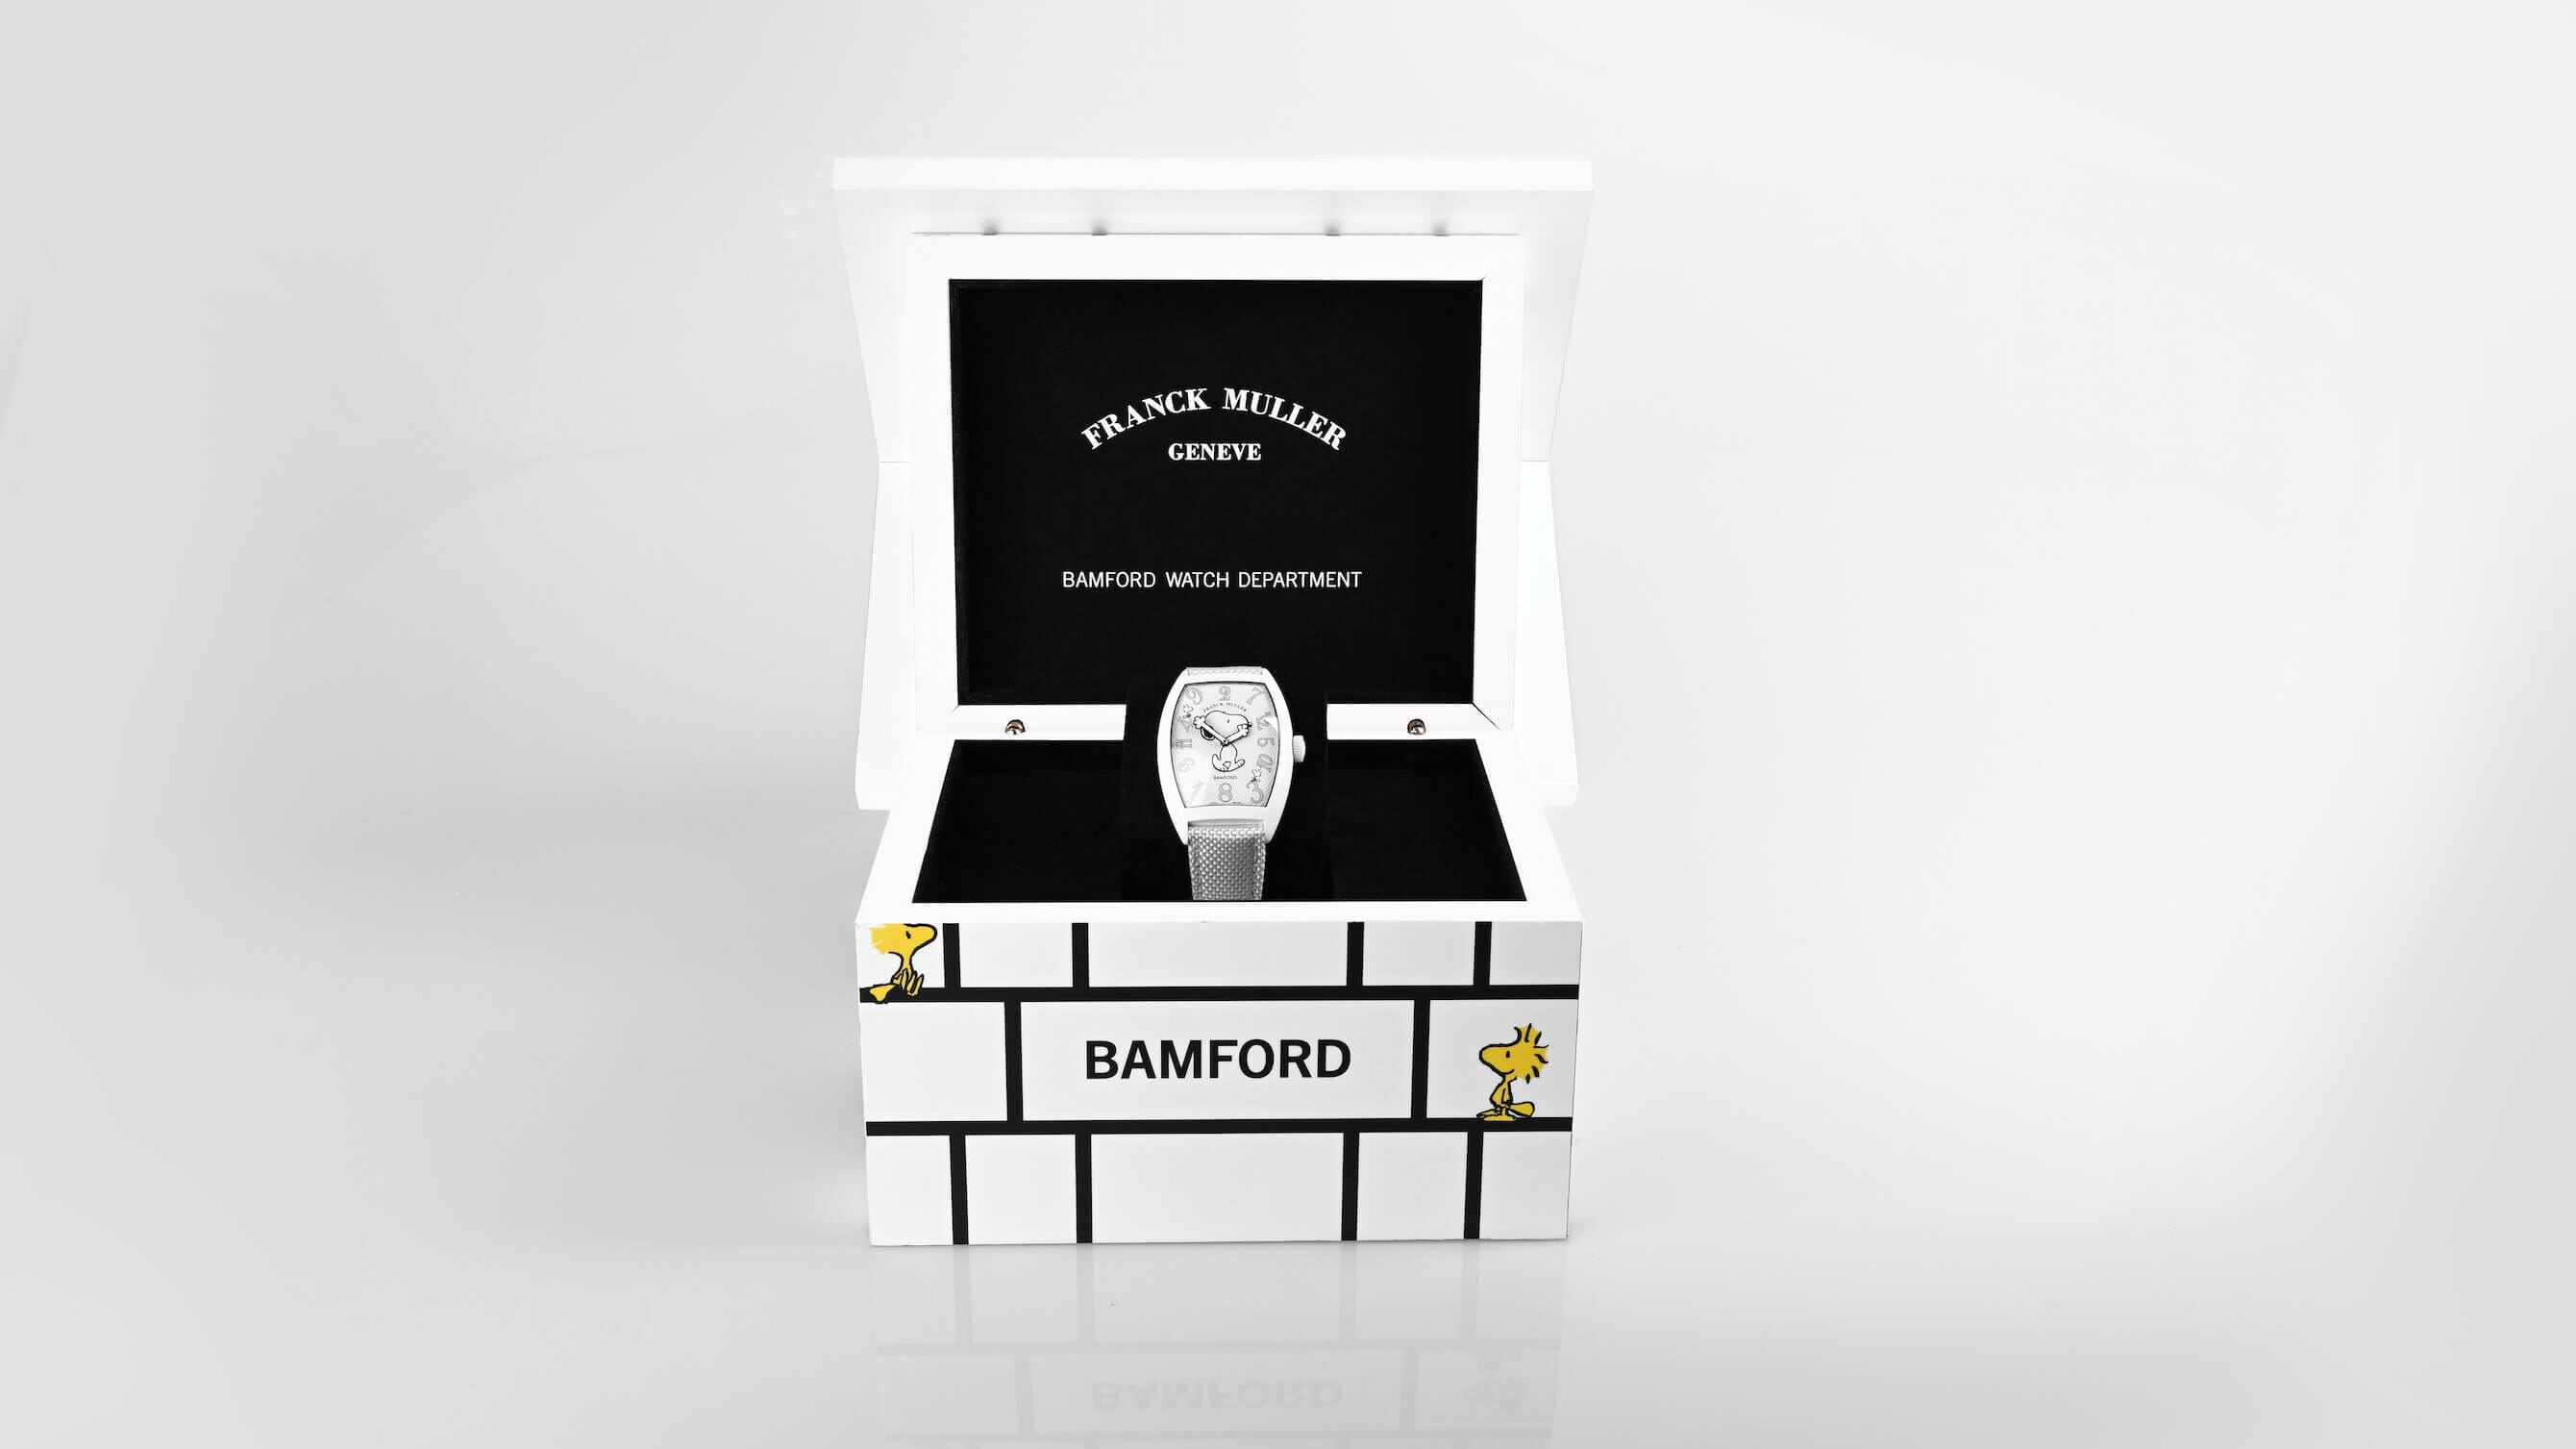 Franck Muller & Bamford Watch Department debut a snowy Snoopy Crazy Hours sequel